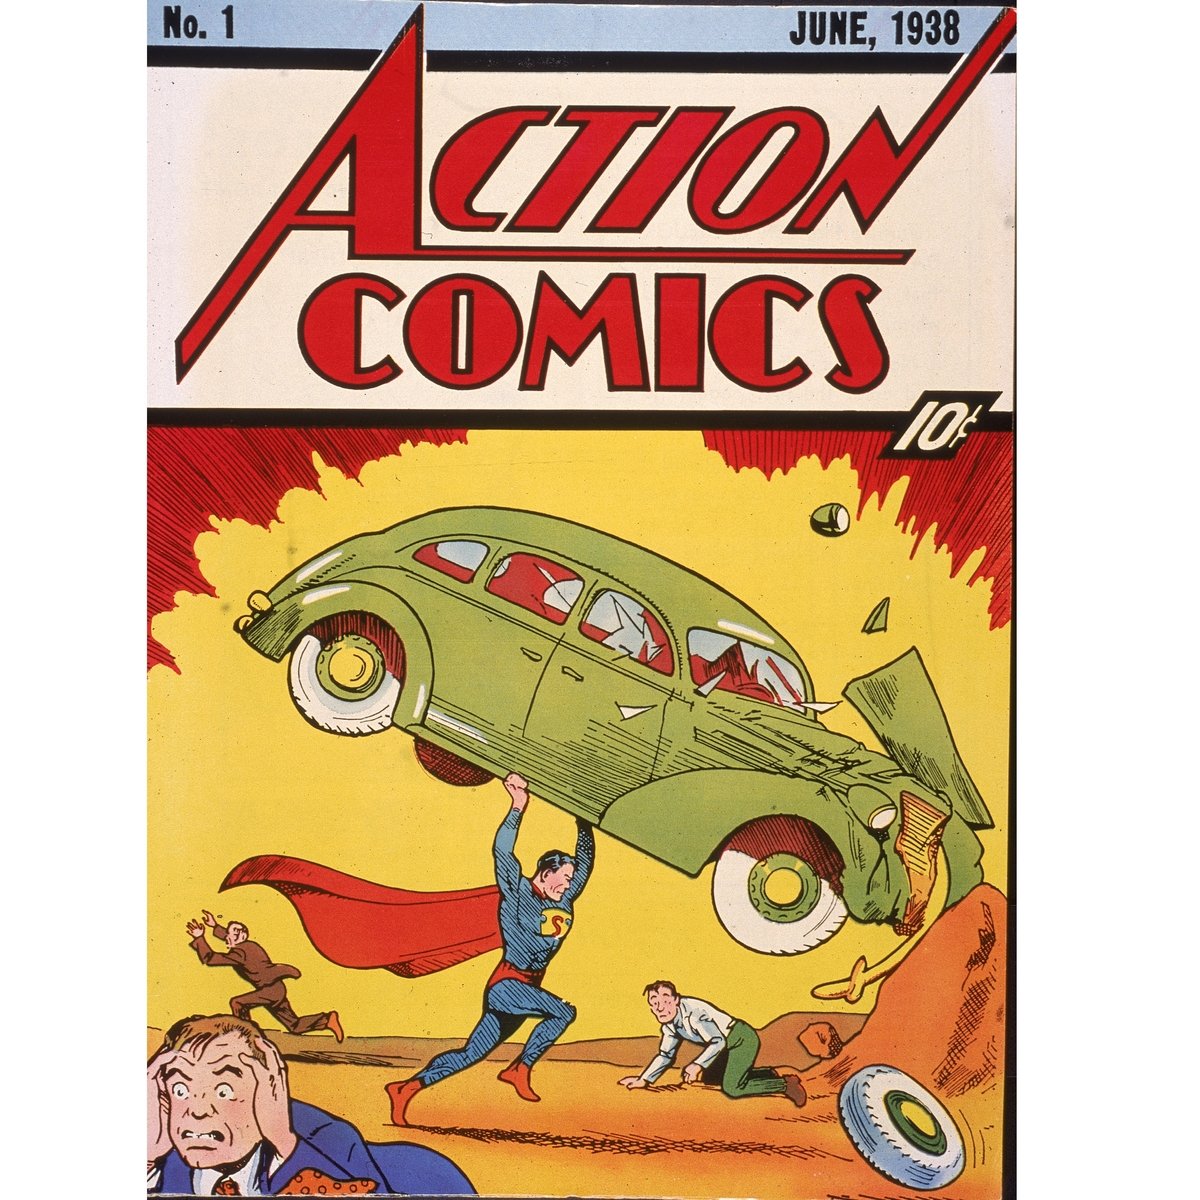 Action Comics #1, the first appearance of Superman in DC Comics